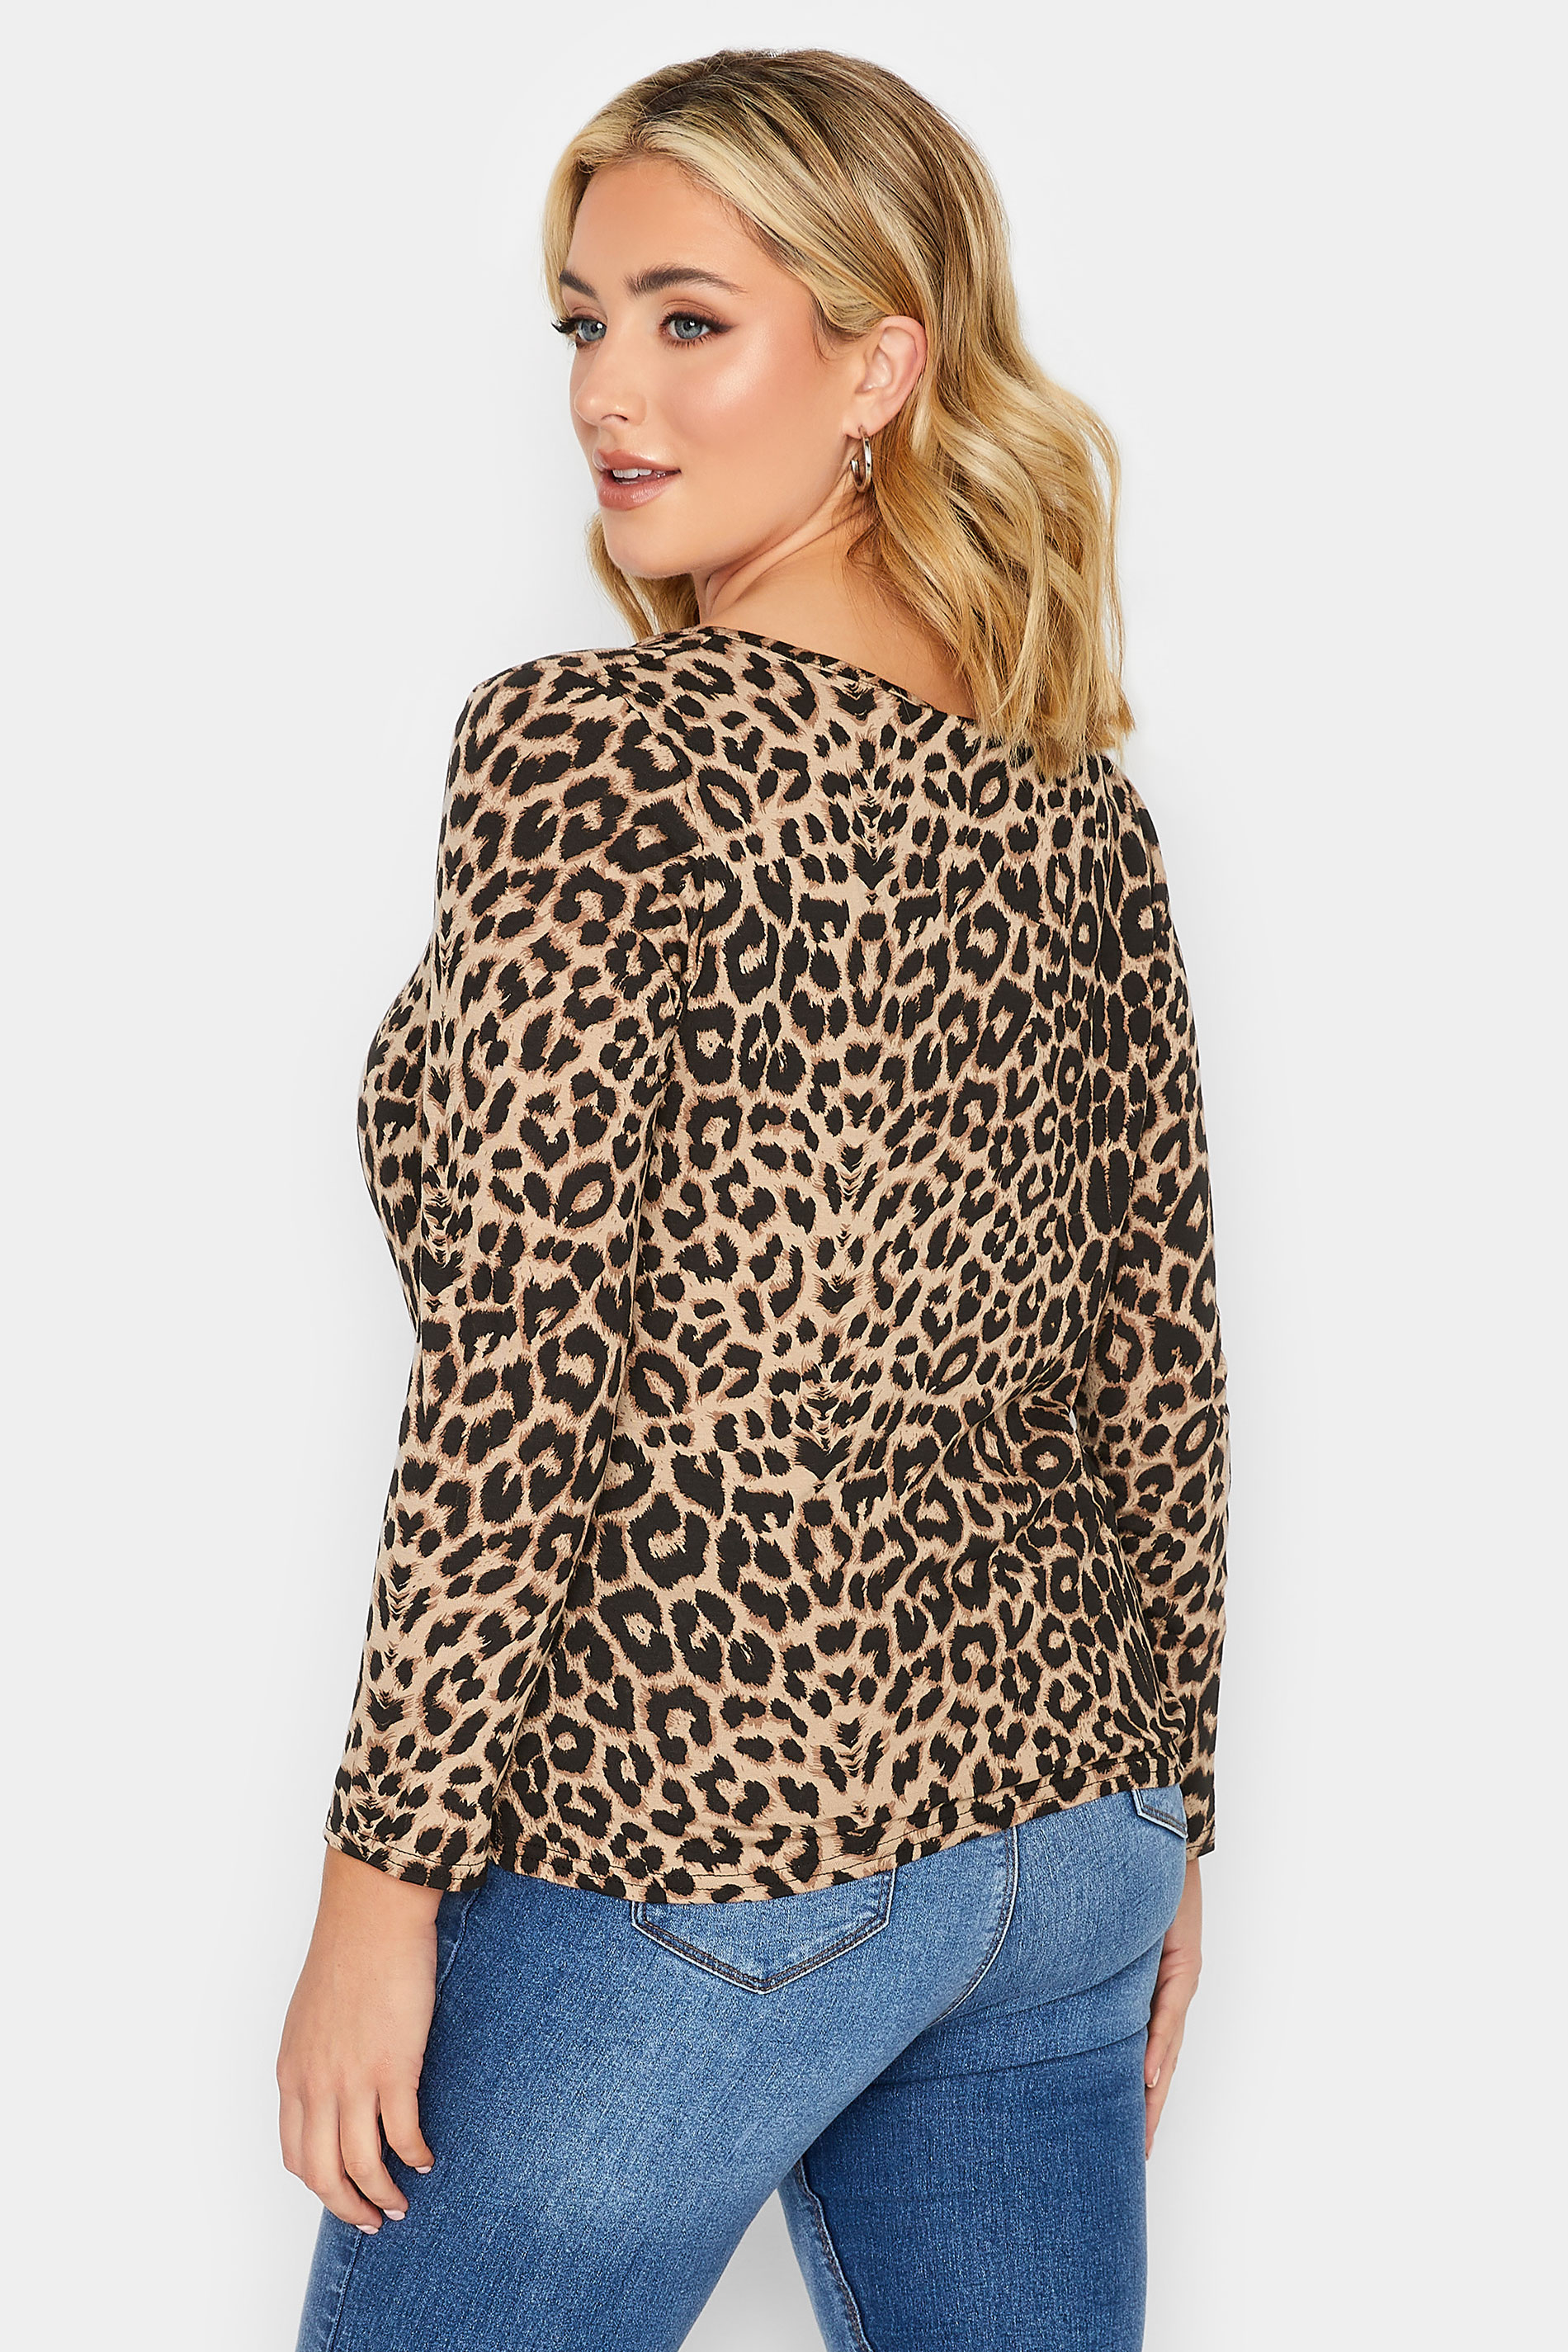 YOURS PETITE Plus Size Brown Leopard Print Square Neck Top | Yours Clothing 3